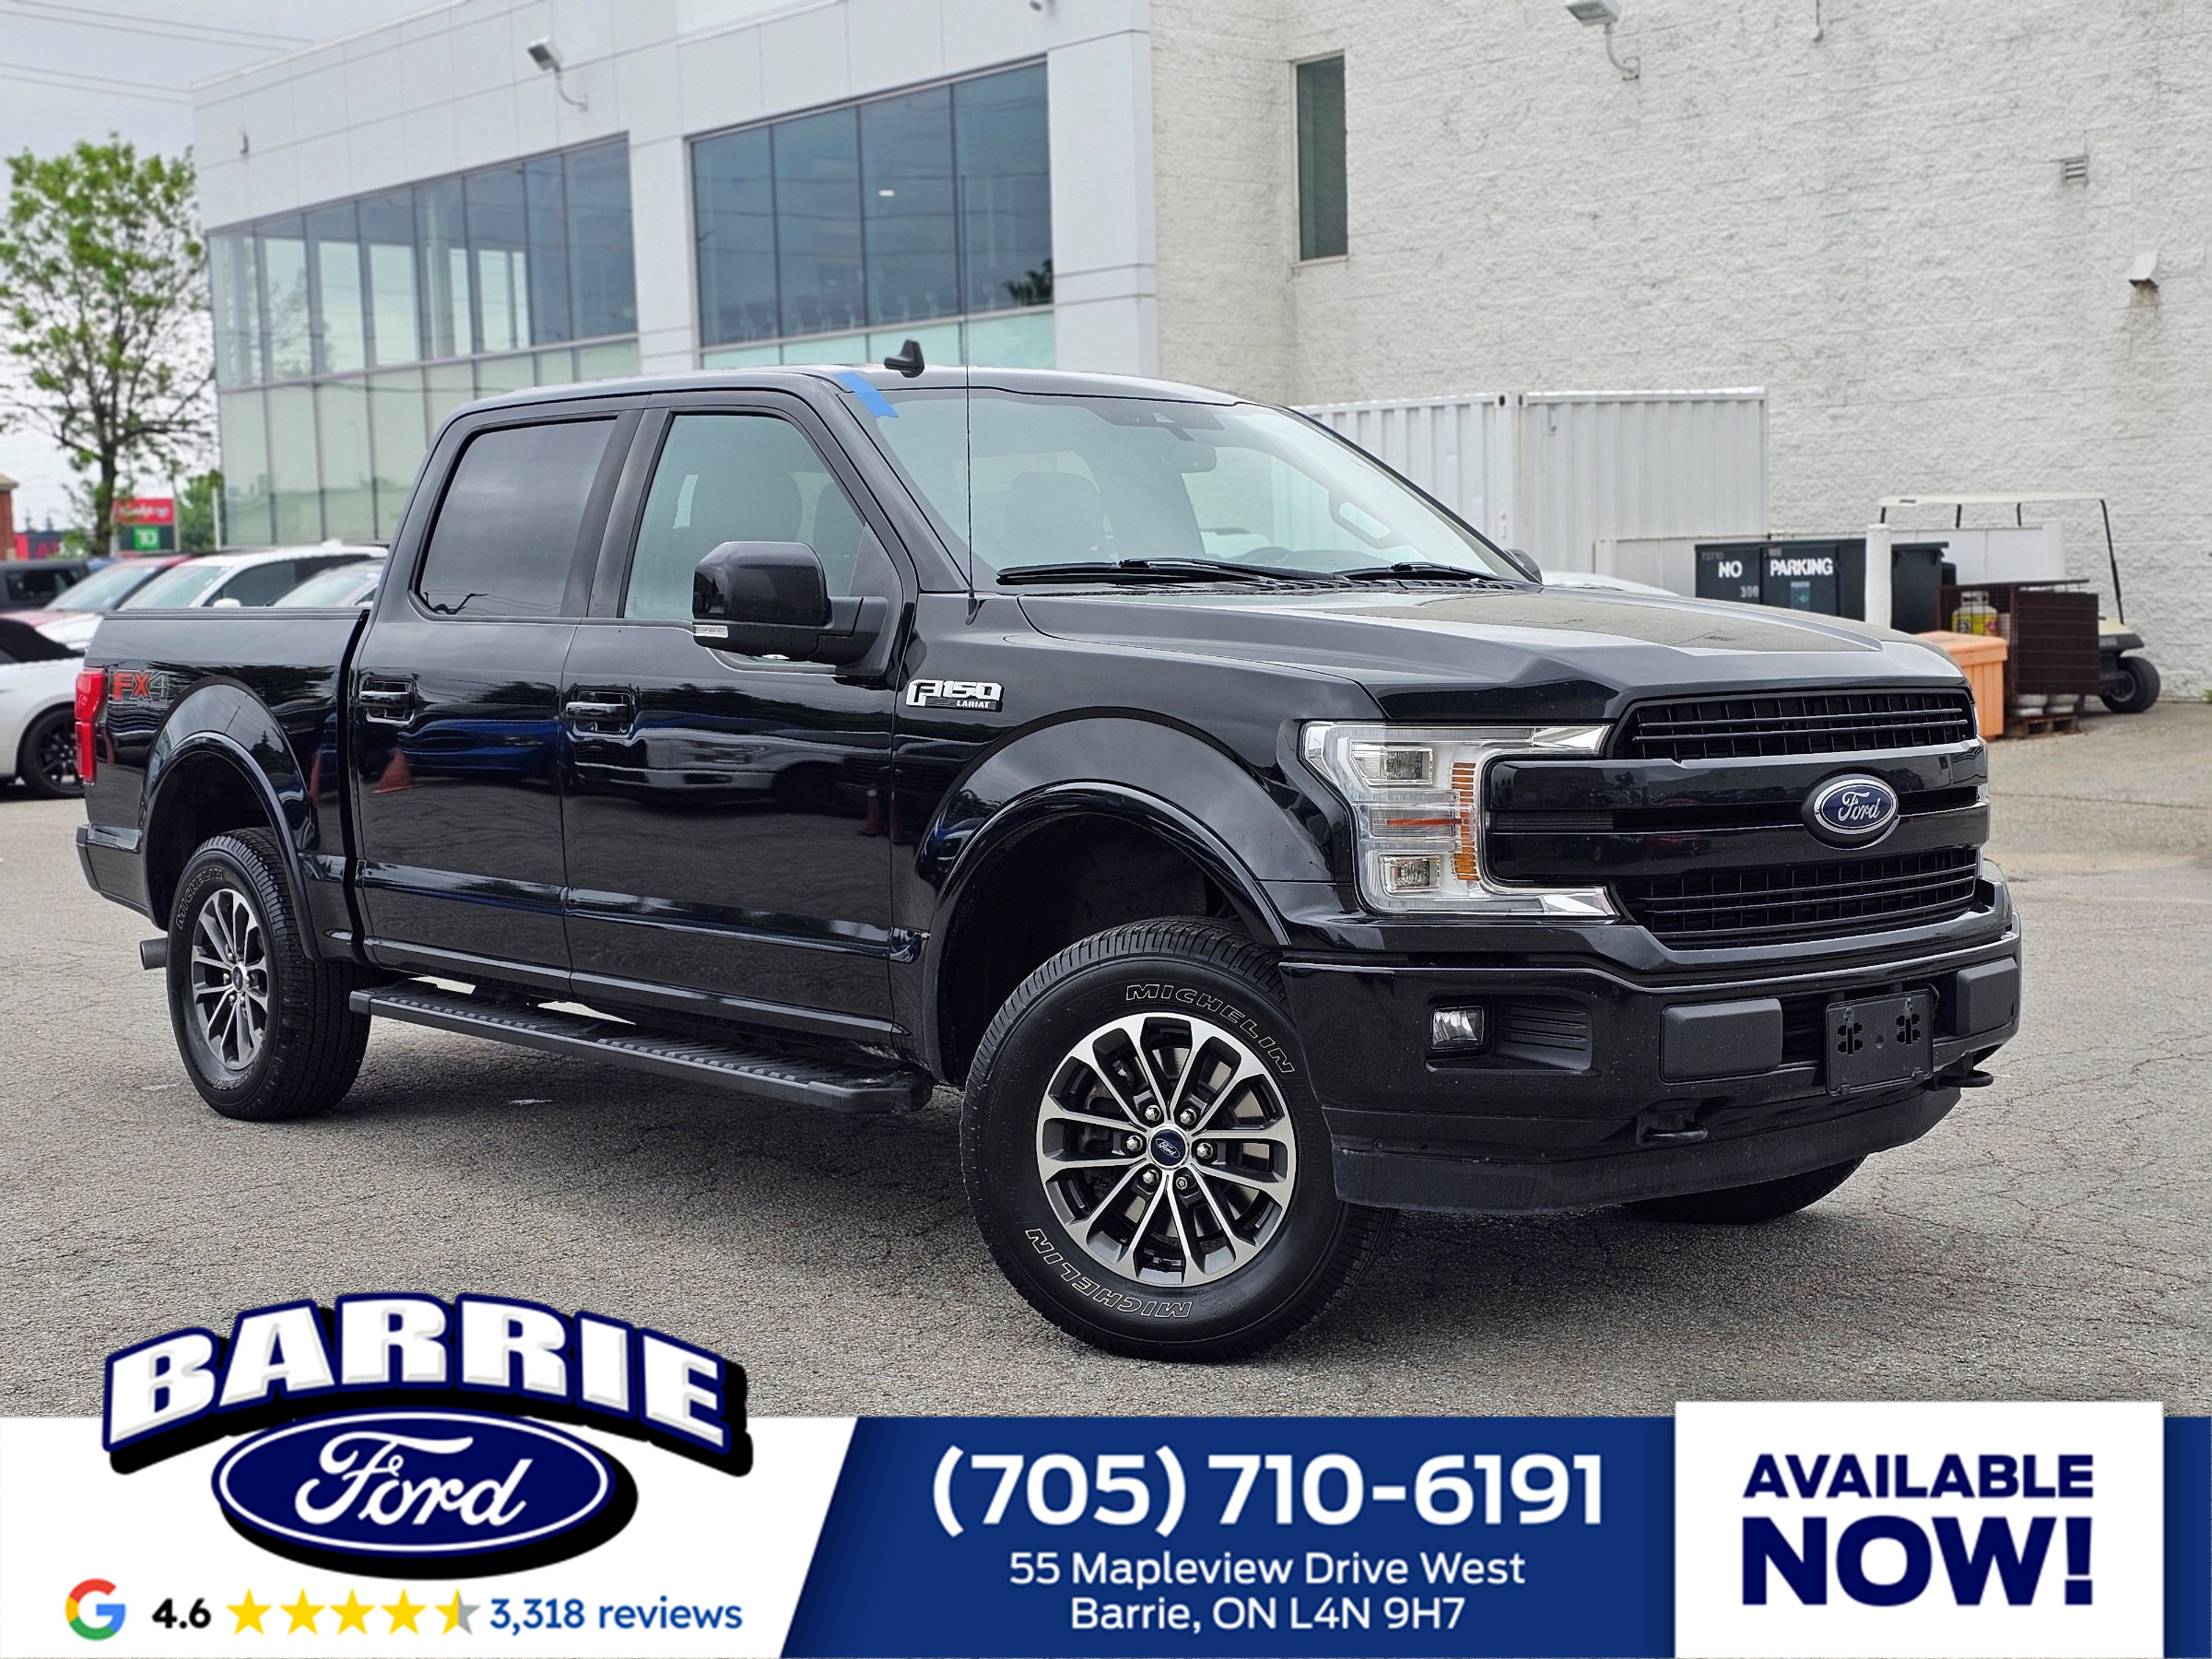 2020 Ford F-150 Lariat 3.5 ECOBOOST V6 | 10-SPEED AUTO | VOICE ACT